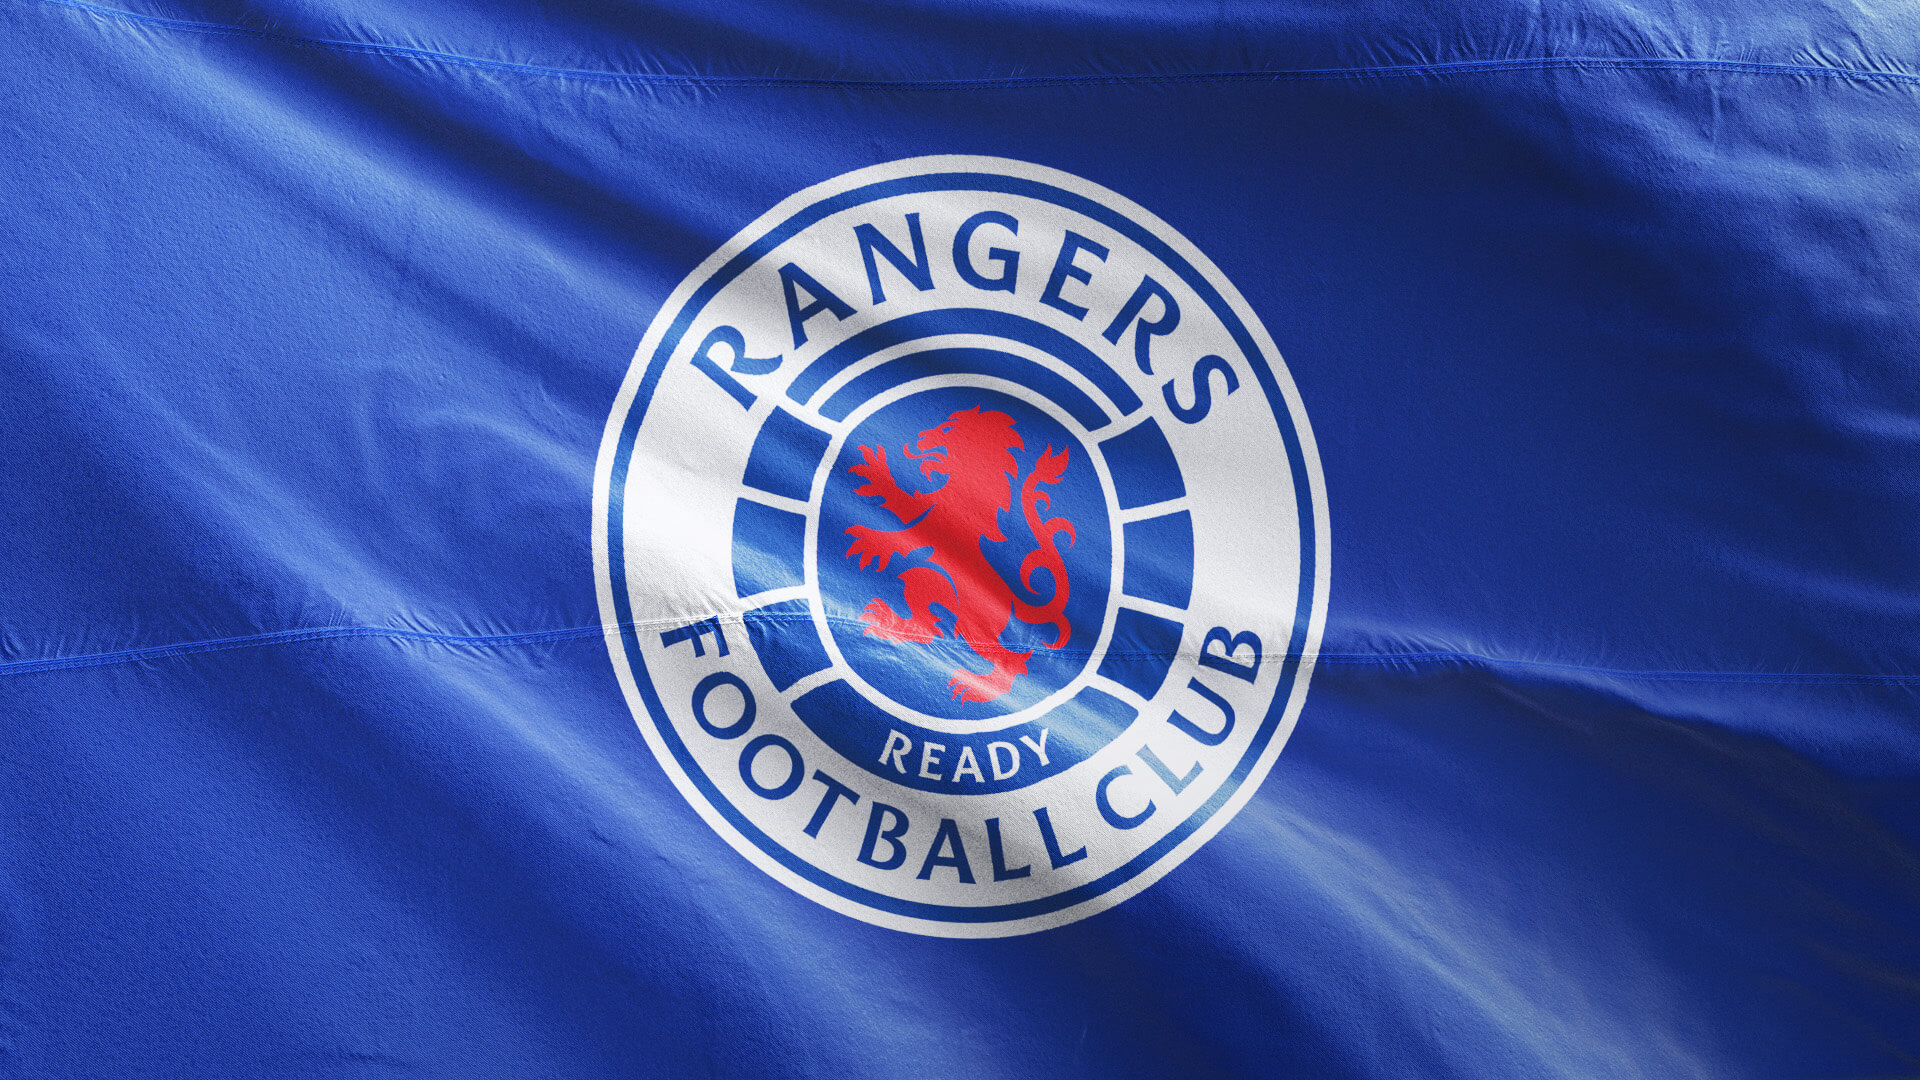 New Logo and Identity for Rangers Football Club by See Saw Creative